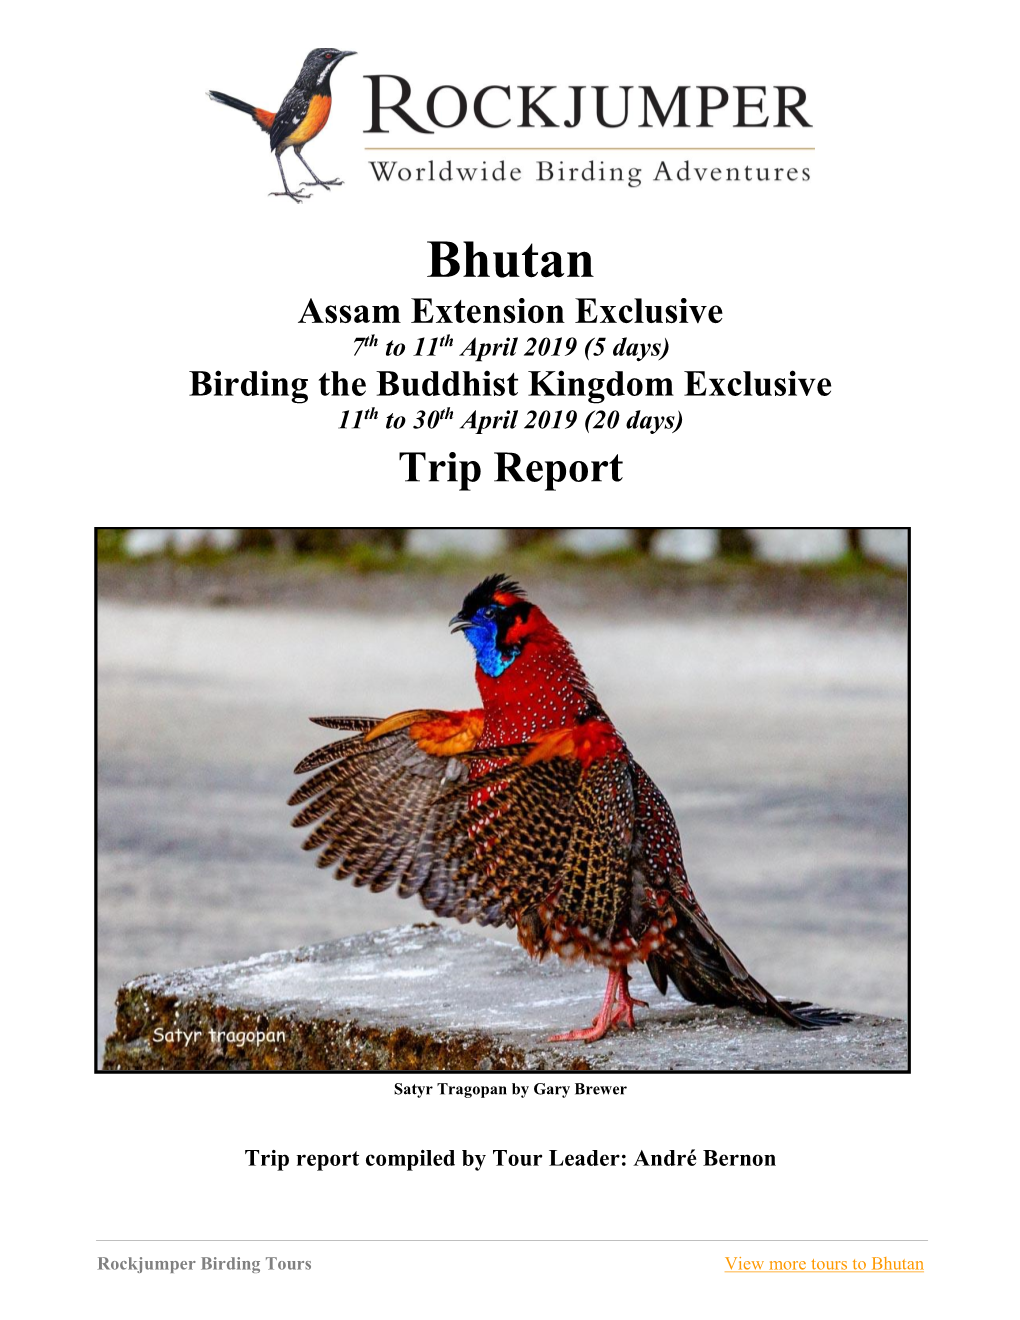 Bhutan Assam Extension Exclusive 7Th to 11Th April 2019 (5 Days) Birding the Buddhist Kingdom Exclusive 11Th to 30Th April 2019 (20 Days) Trip Report